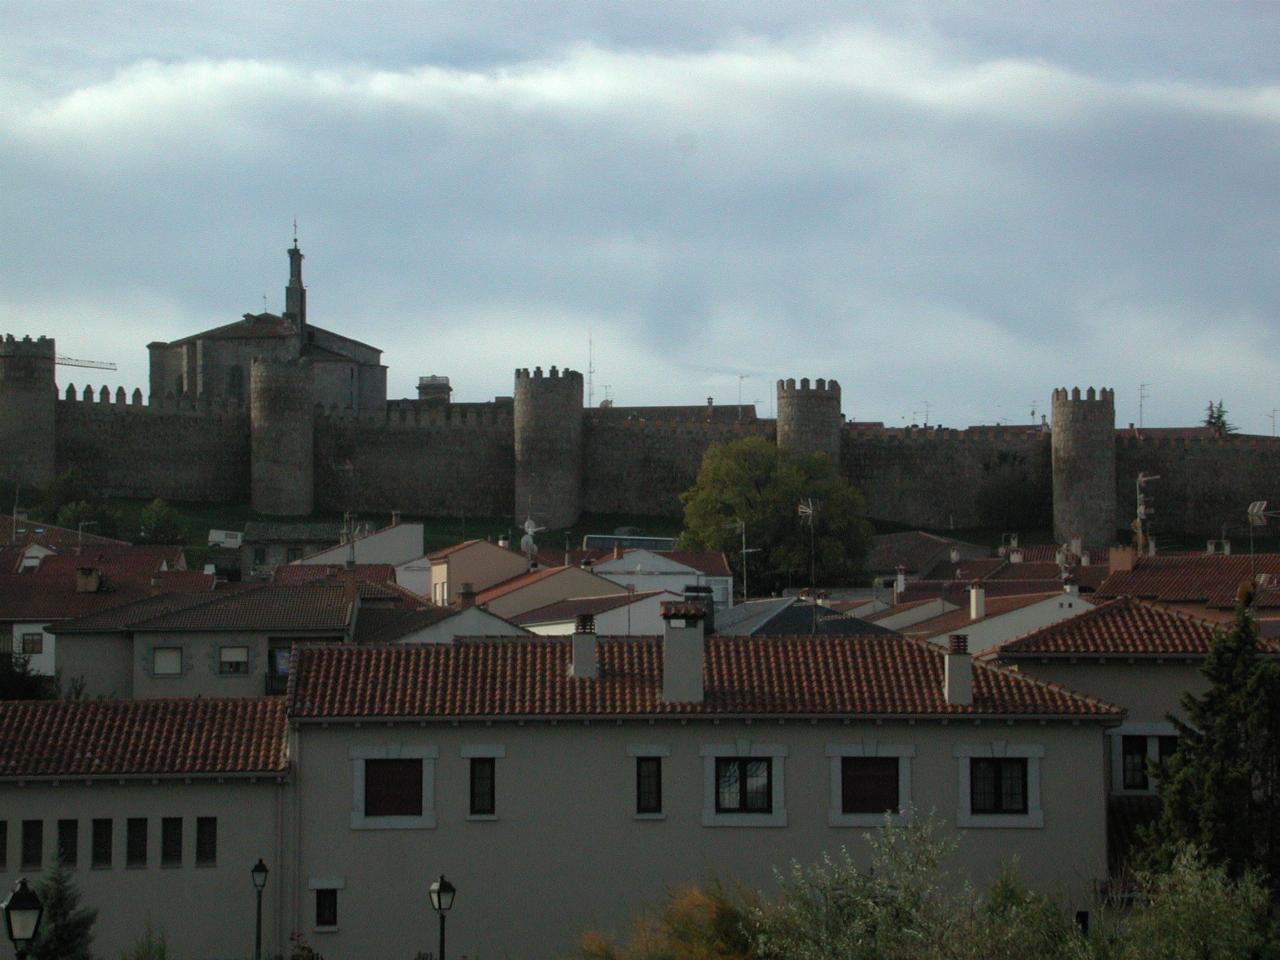 Avila City Walls as seen from Monastery of the Annunciation